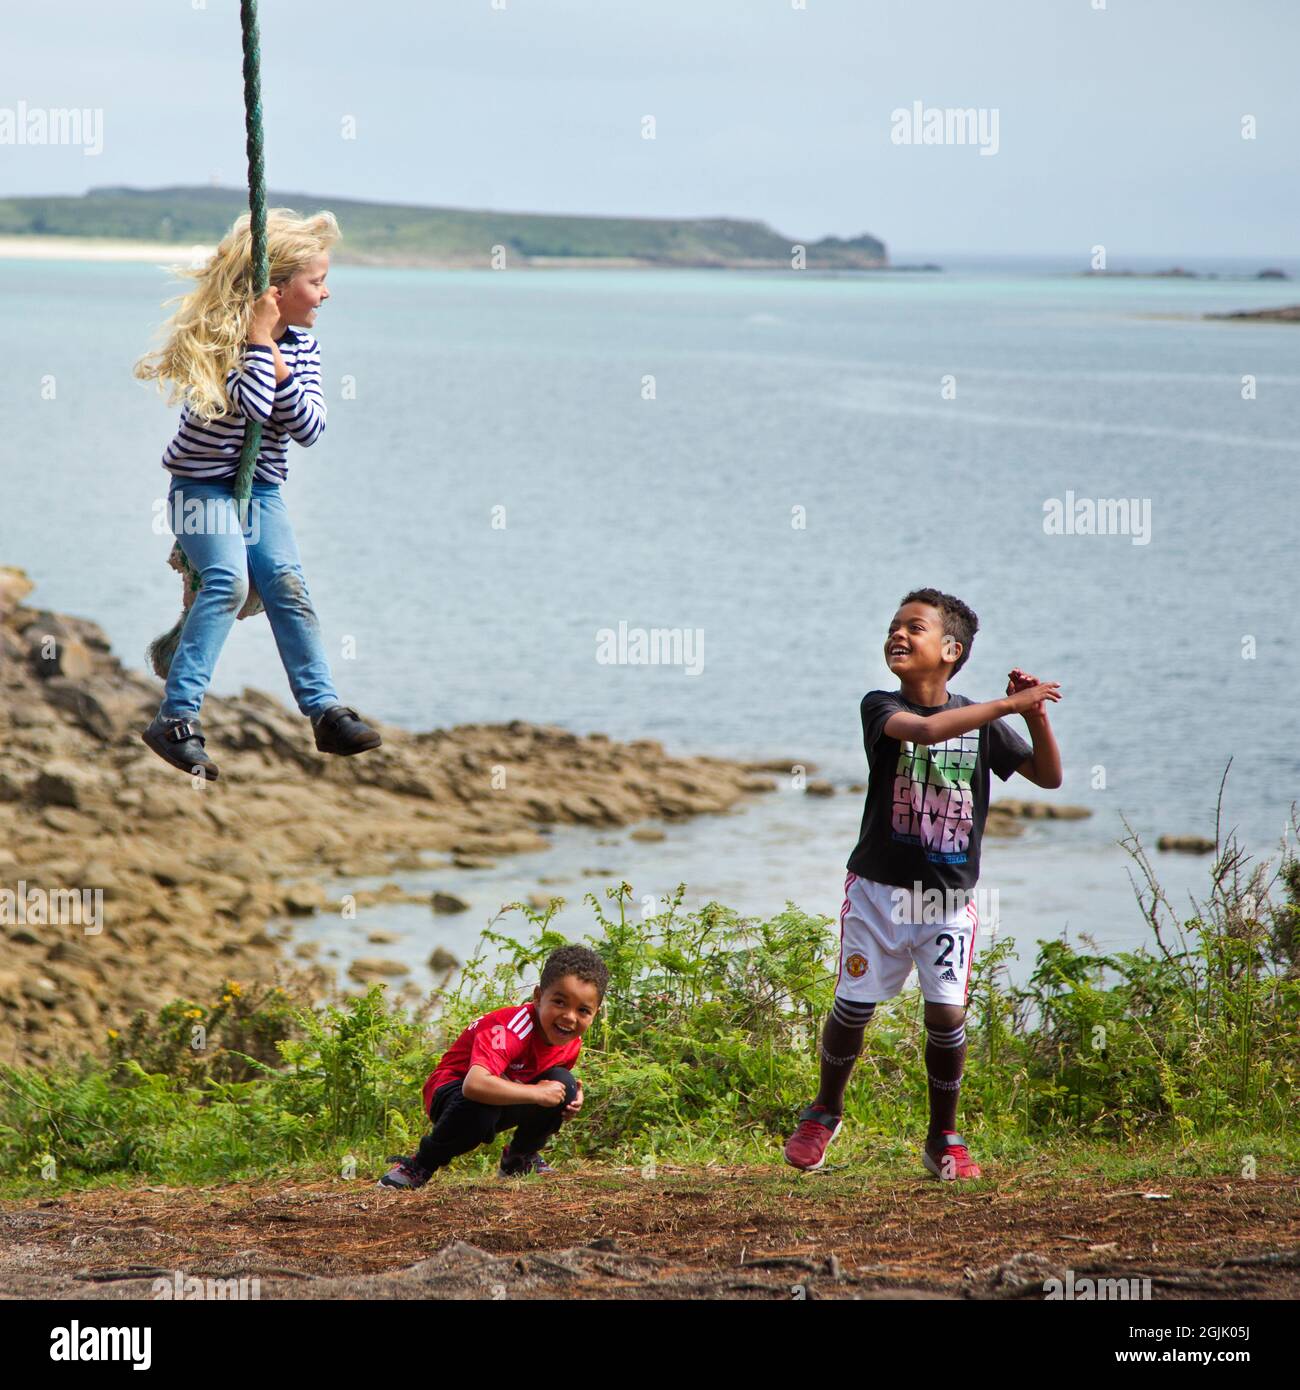 Three children from mixed race playing together Stock Photo